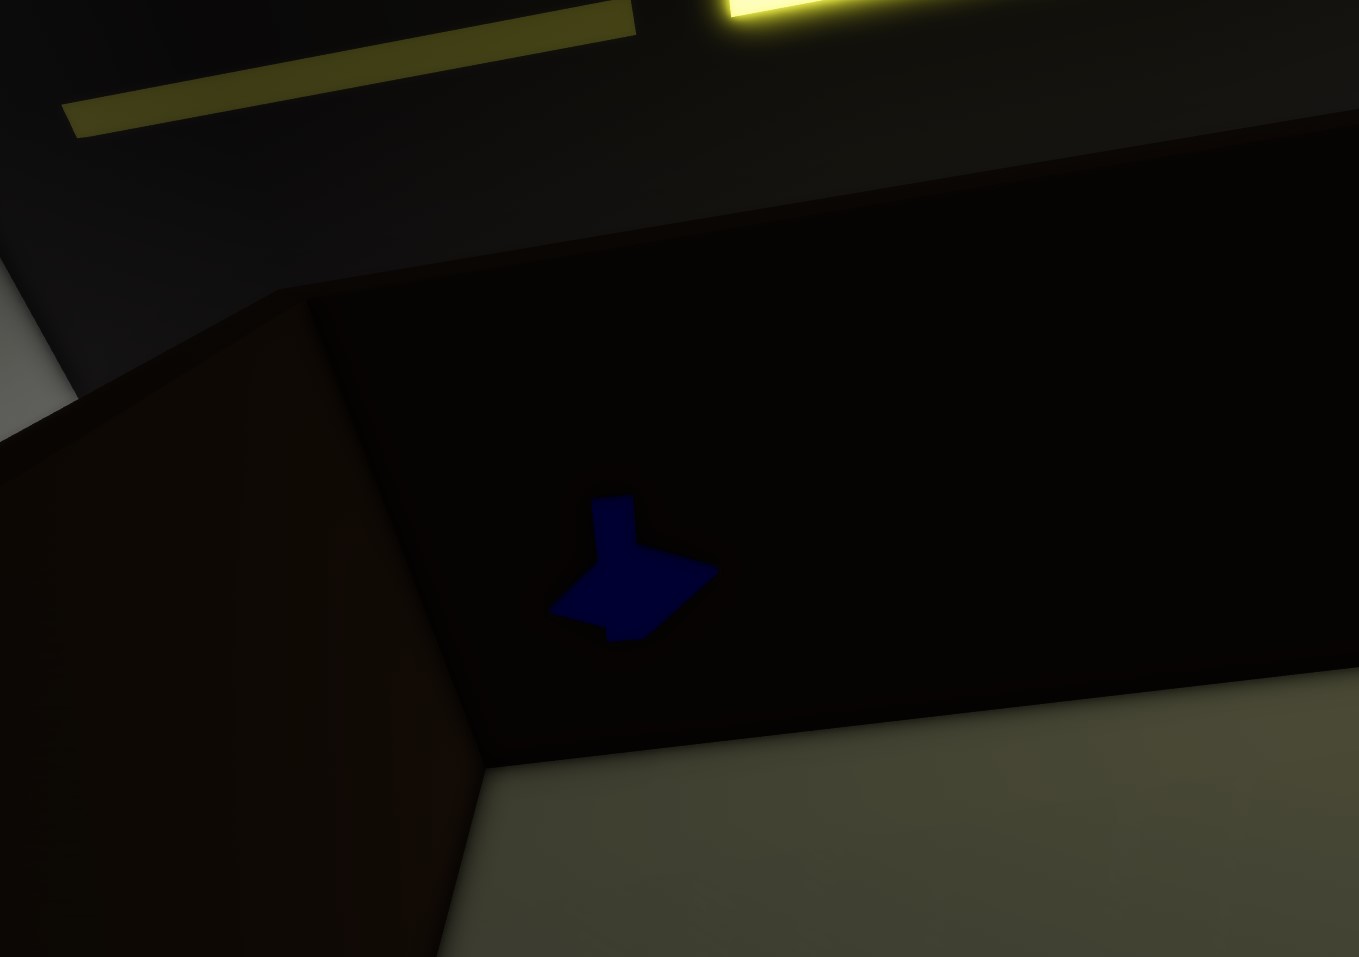 Secret button under a table in a room behind xray.